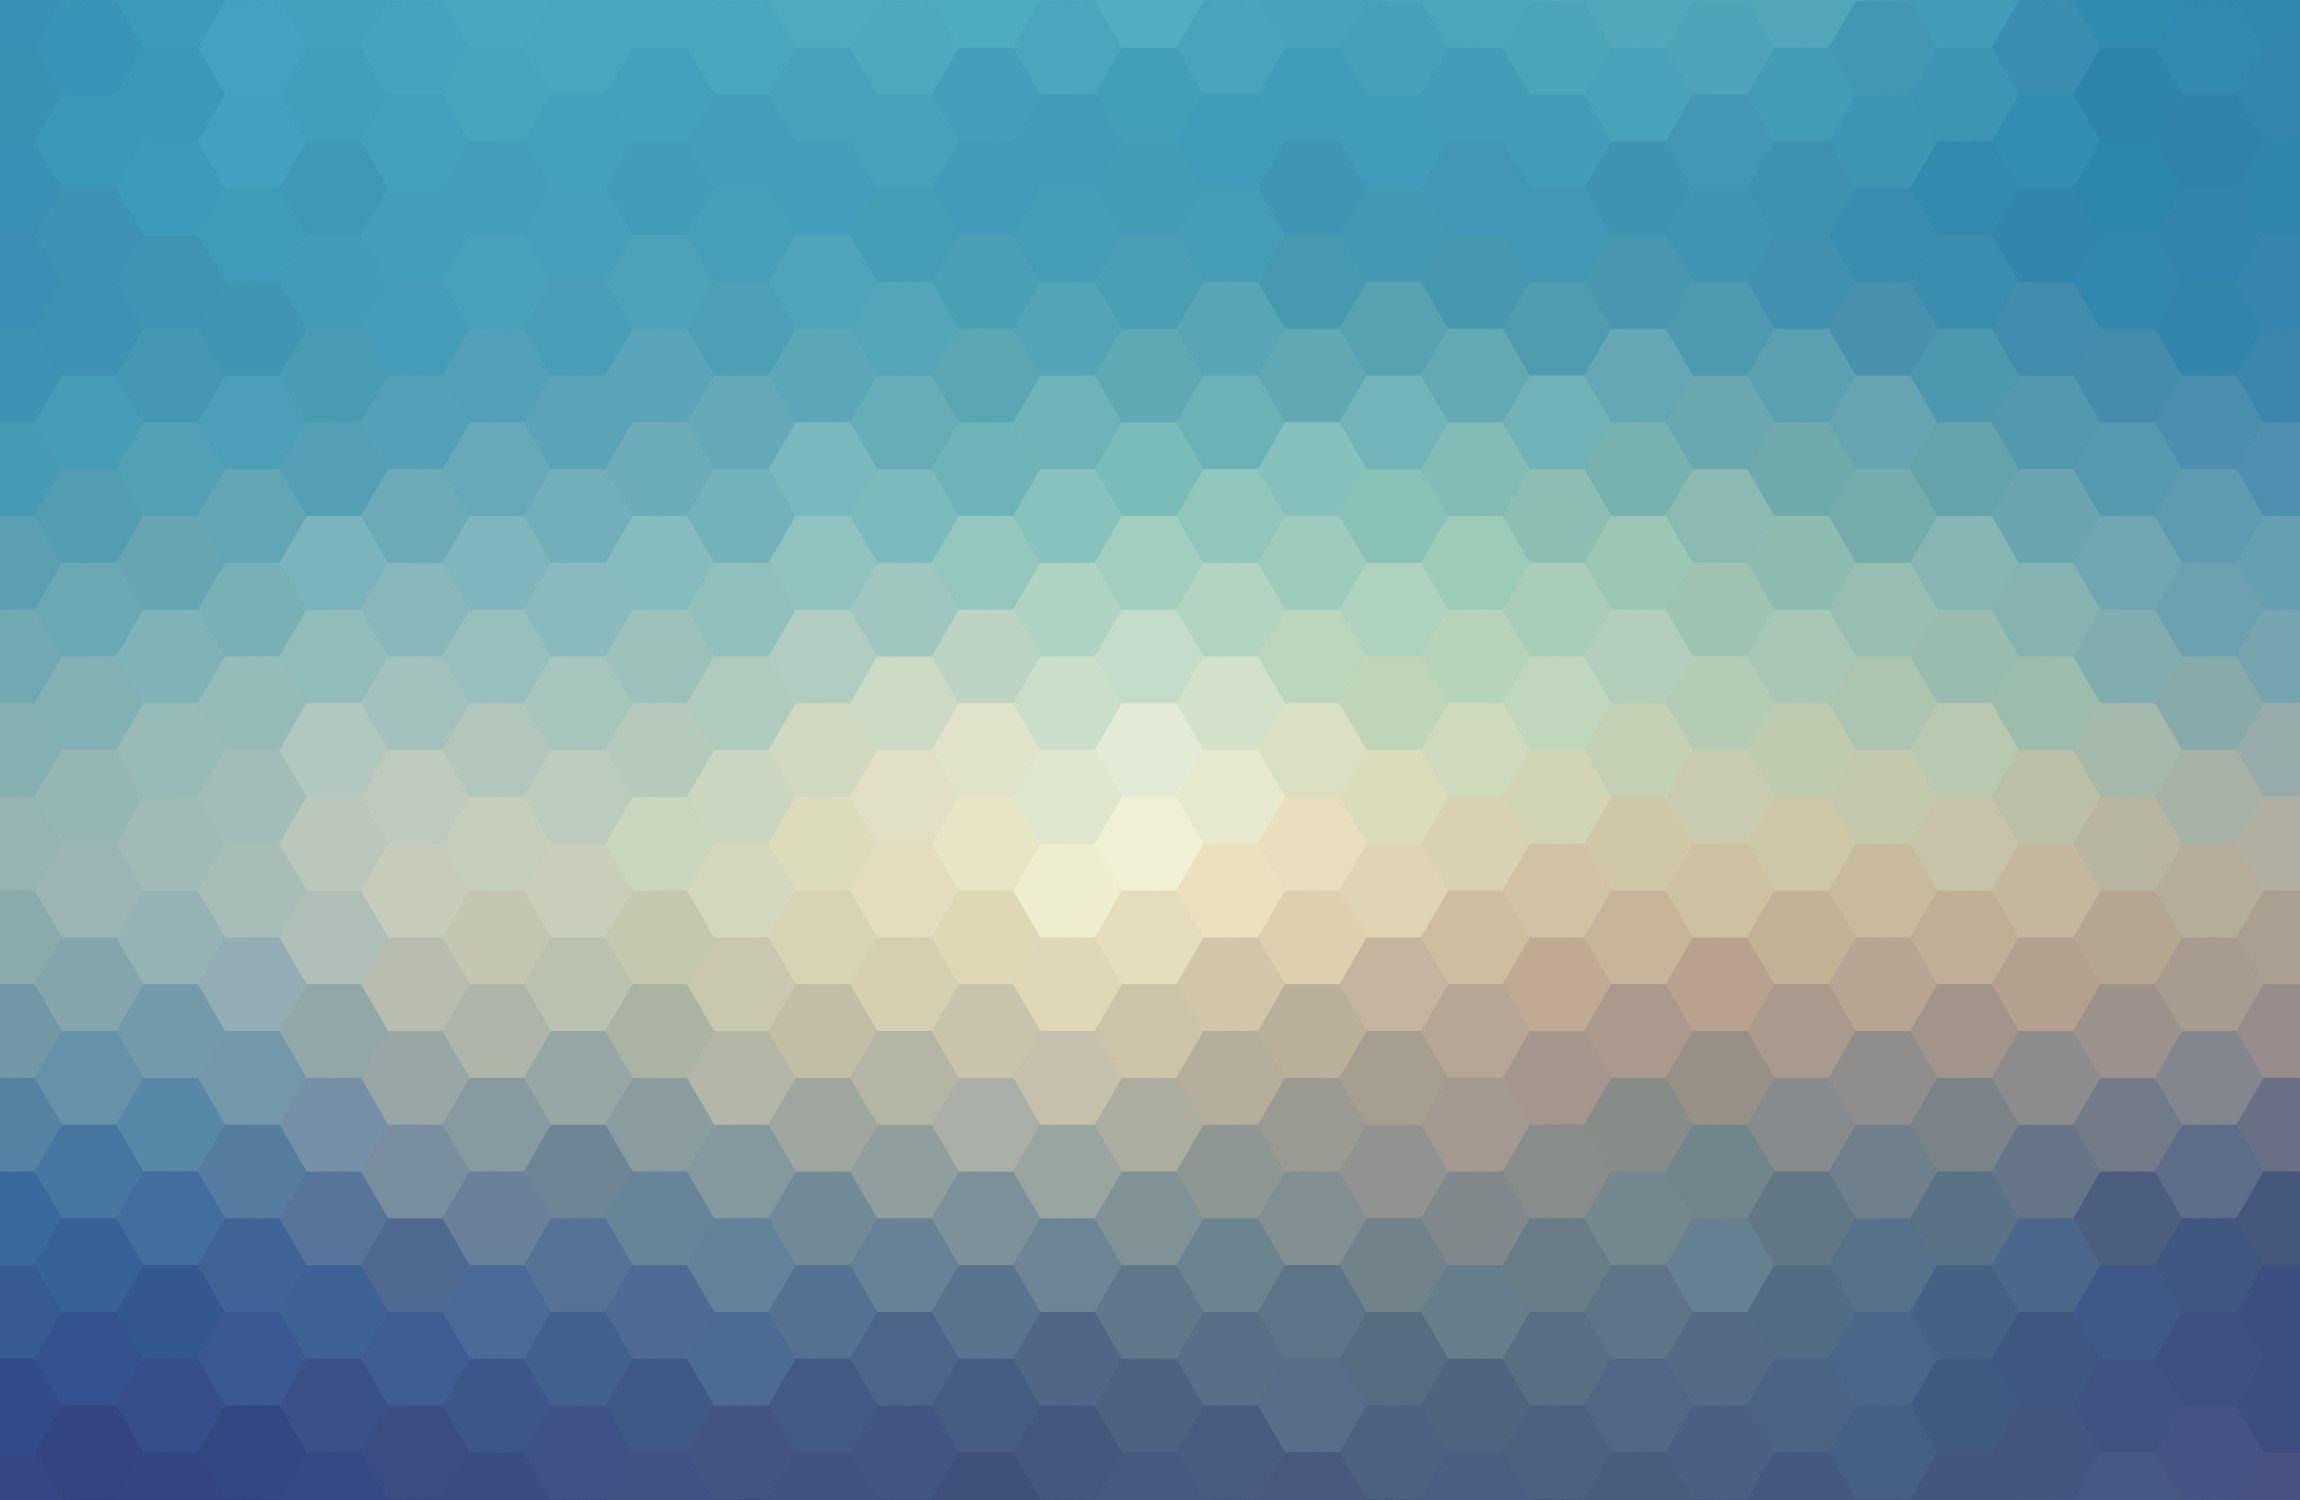 How do I make a geometric gradient background like this using